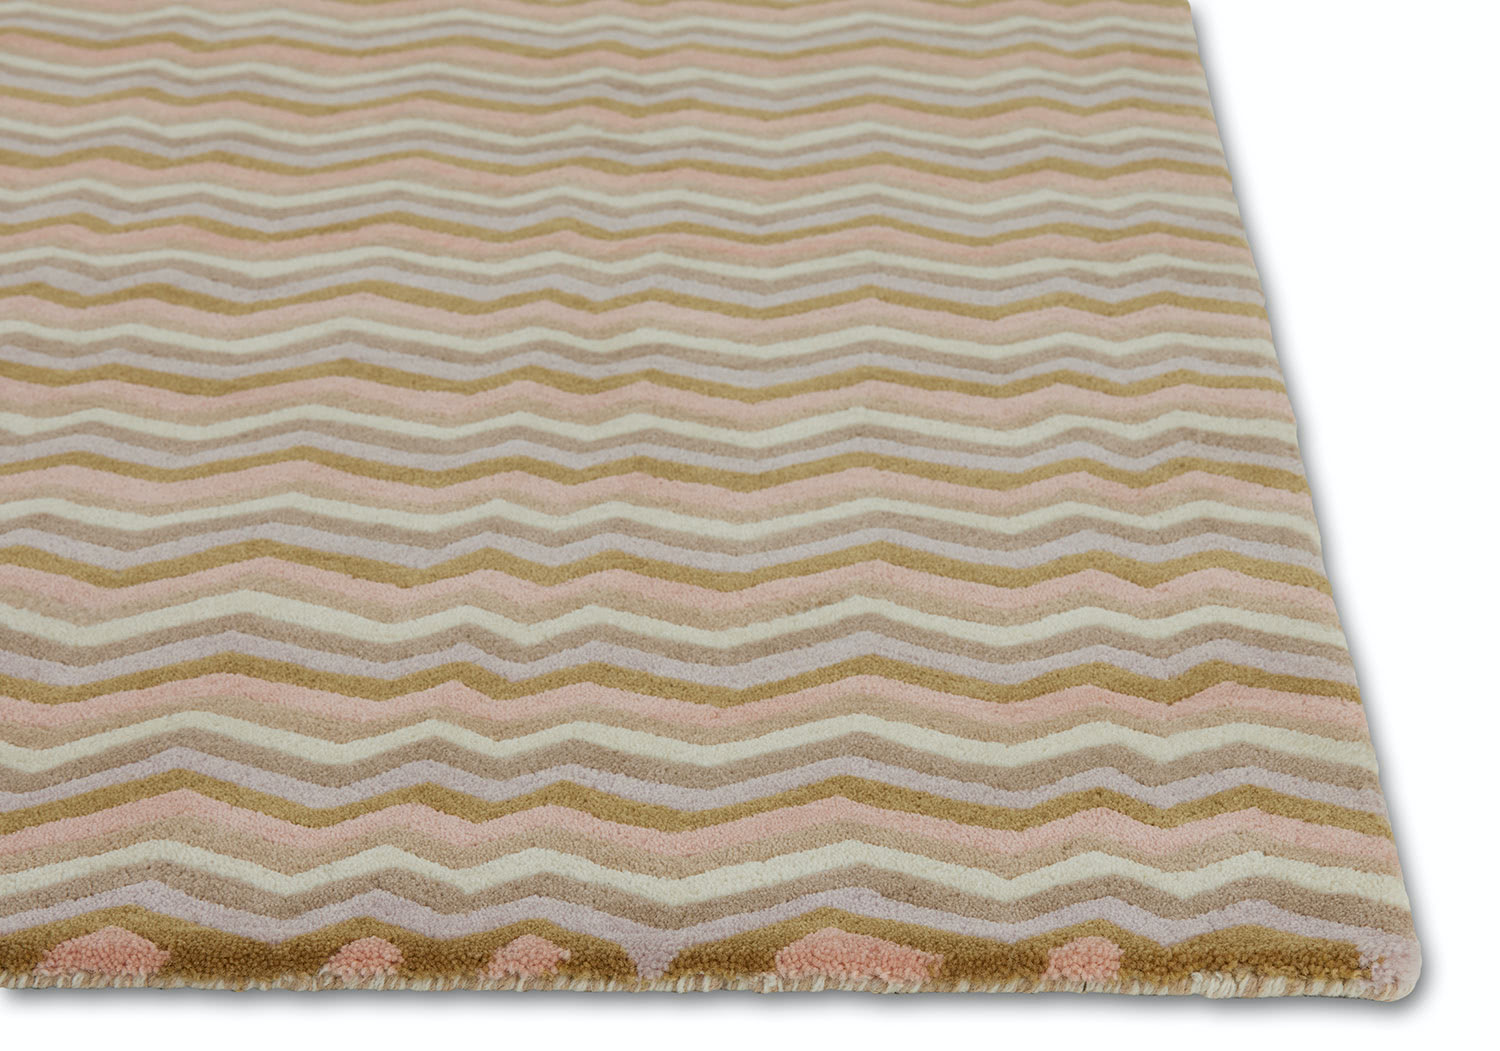 A detail of a modern area rug in cream tones called Buzz Dream